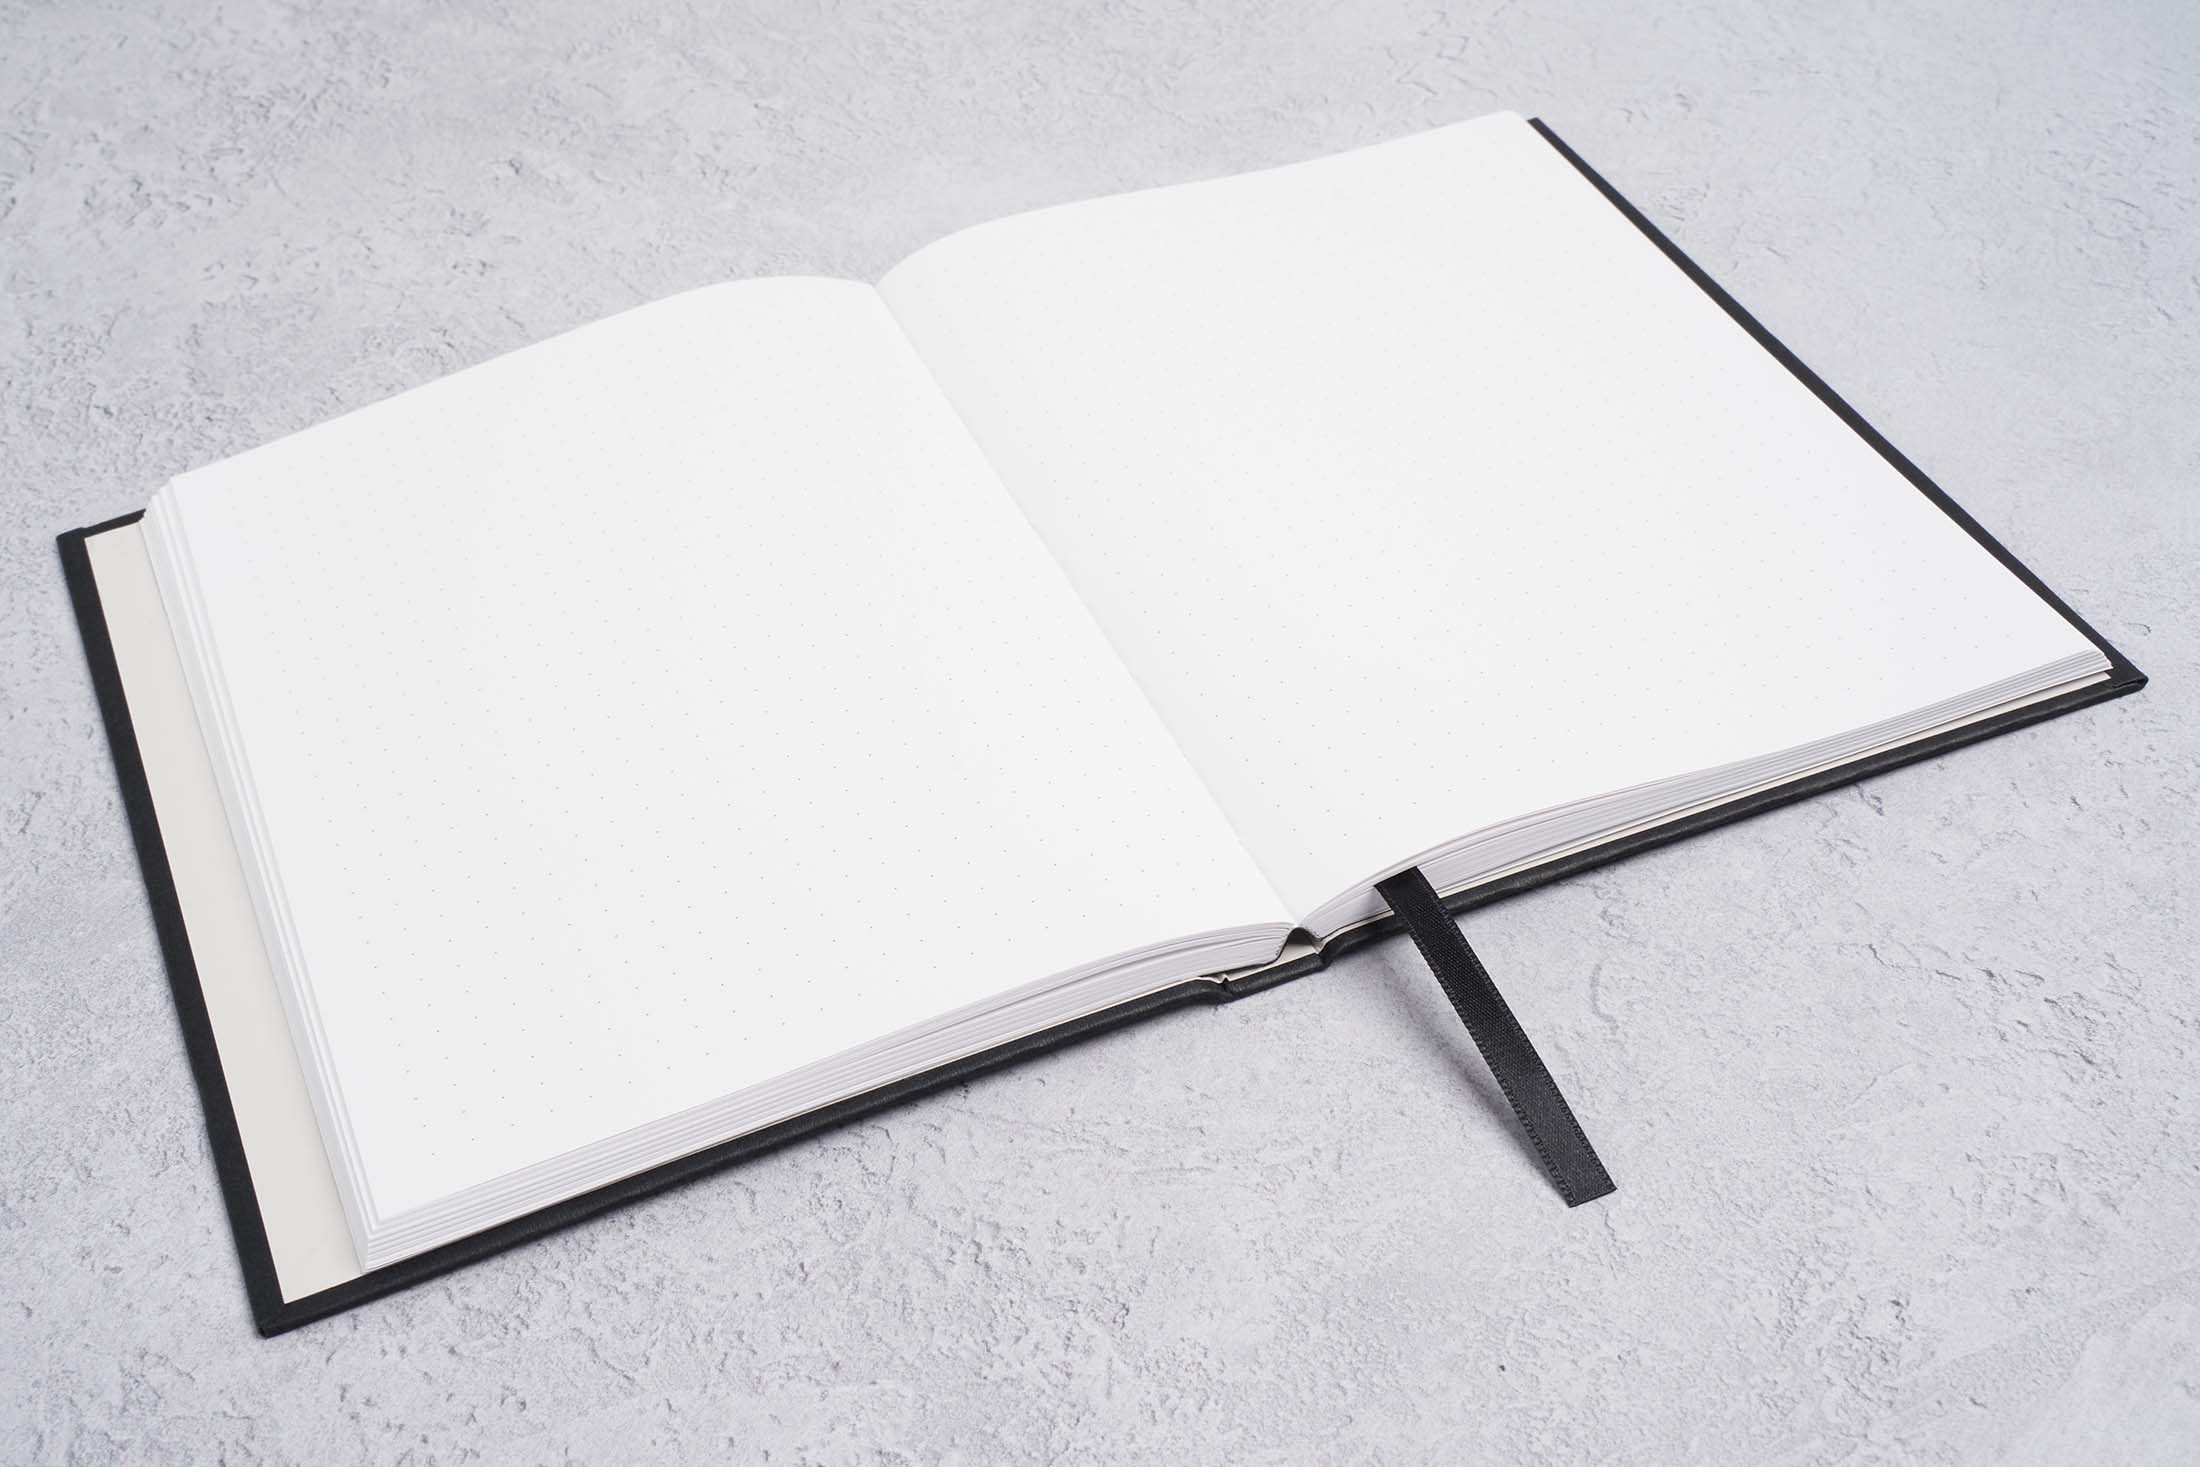 the paper mind blocker paper hardcover notebook open on a flat surface. the notebook lays flat showing the Gmund blocker paper sheets